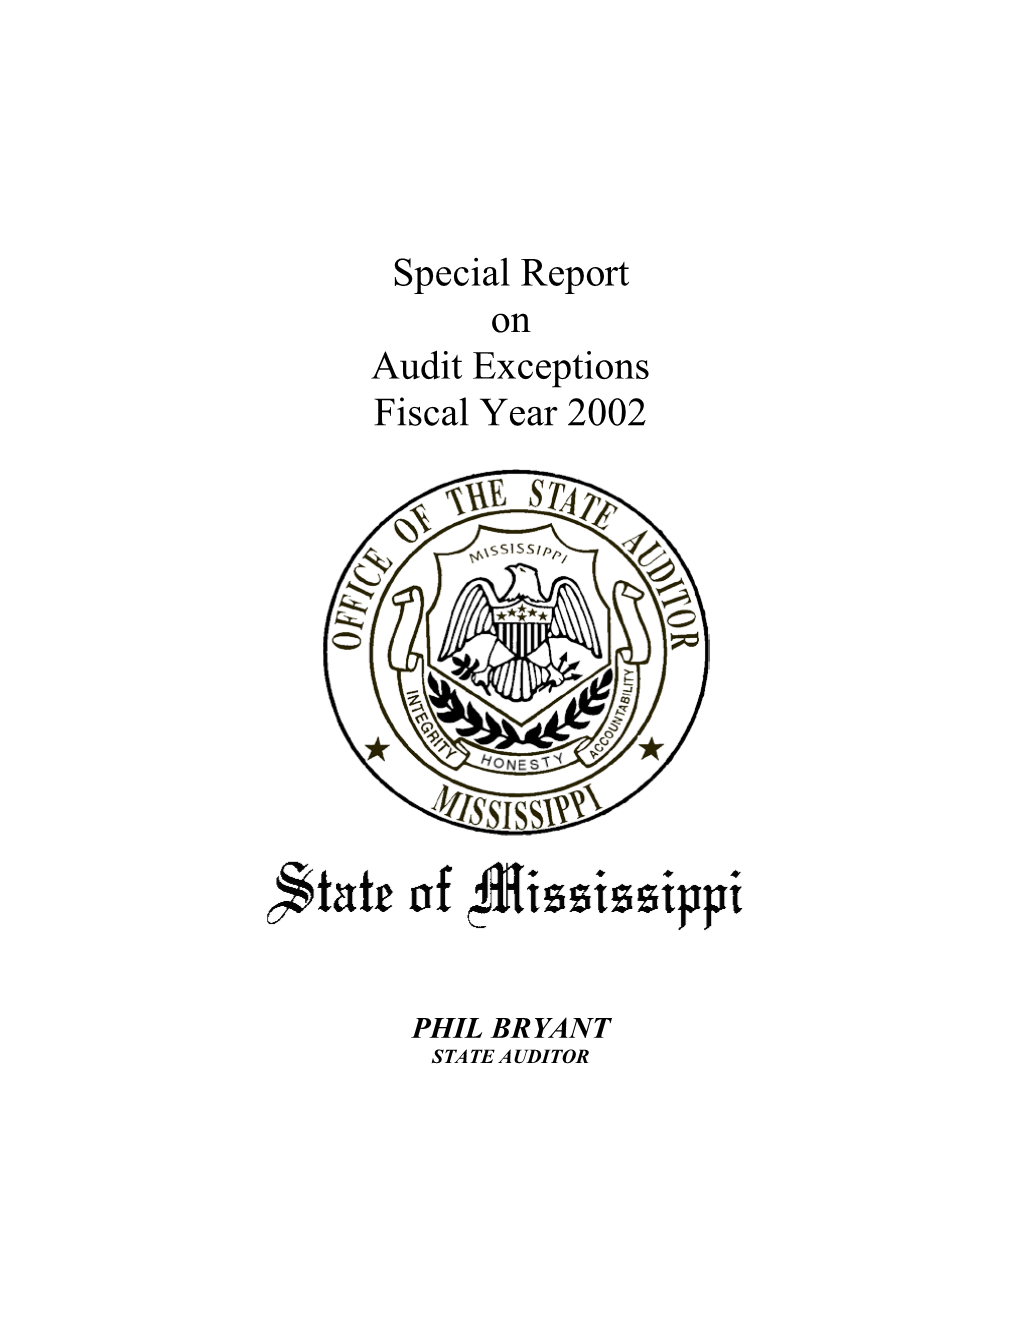 Special Report on Audit Exceptions Fiscal Year 2002